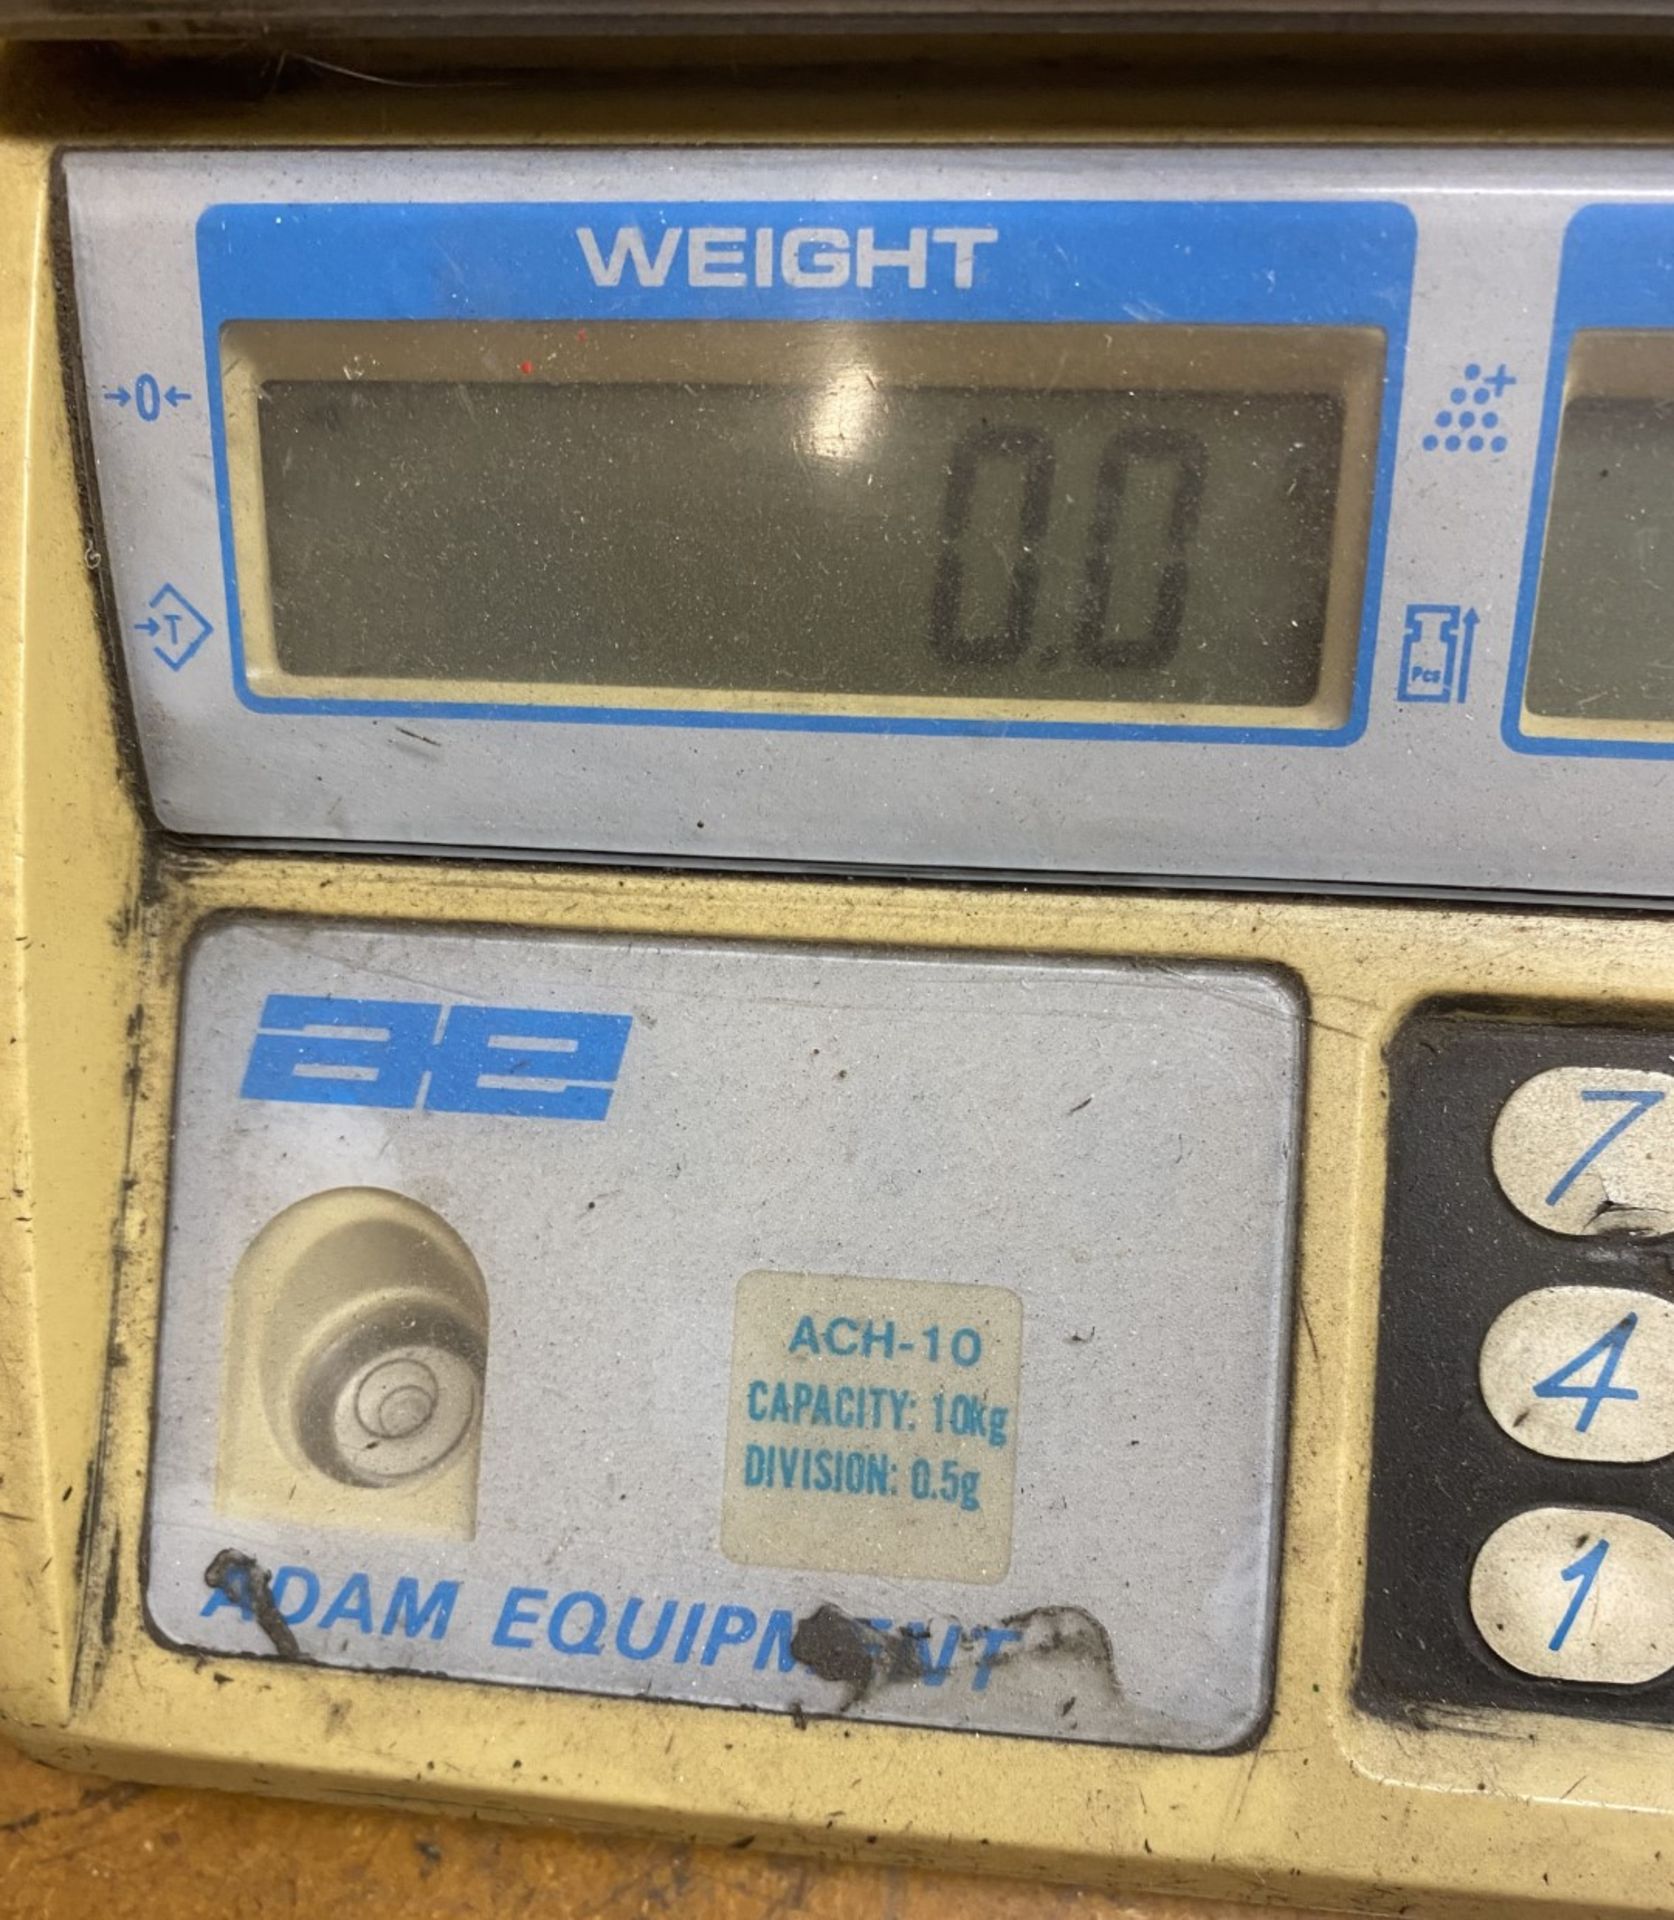 1 x Set of Digital Weighing Scales With Stainless Steel Bowl - Image 2 of 3